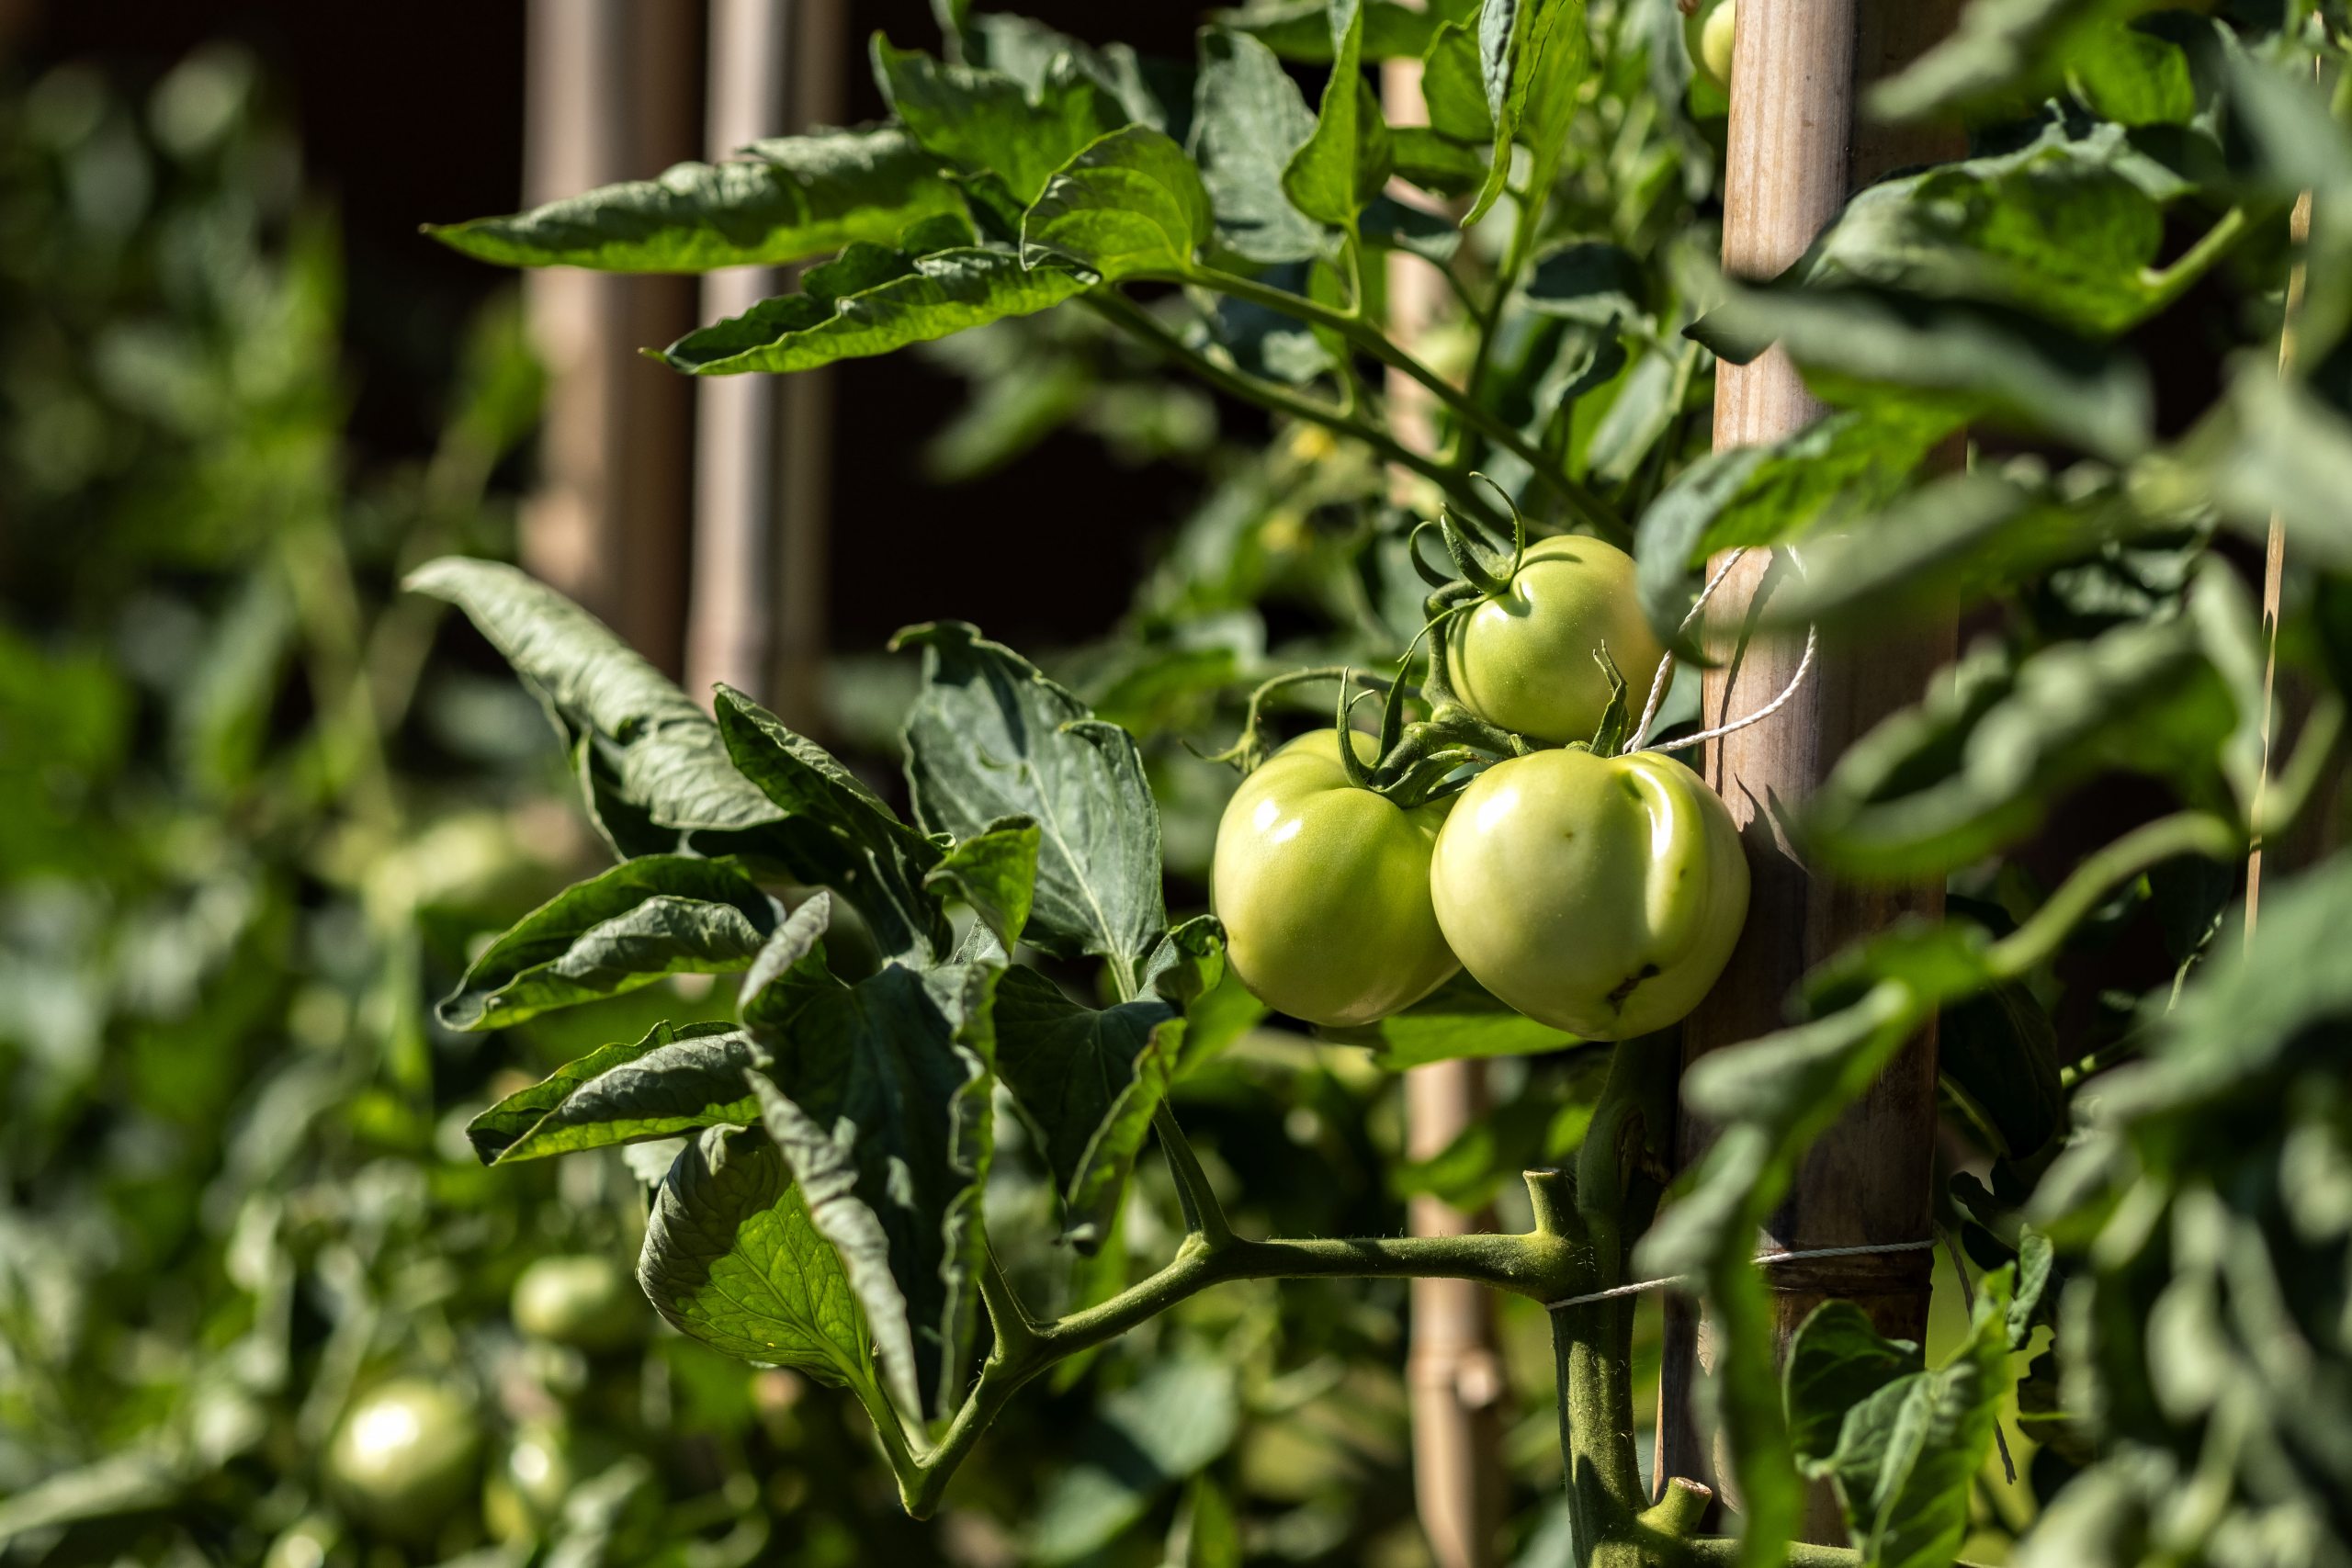 Tomatoes in a garden.